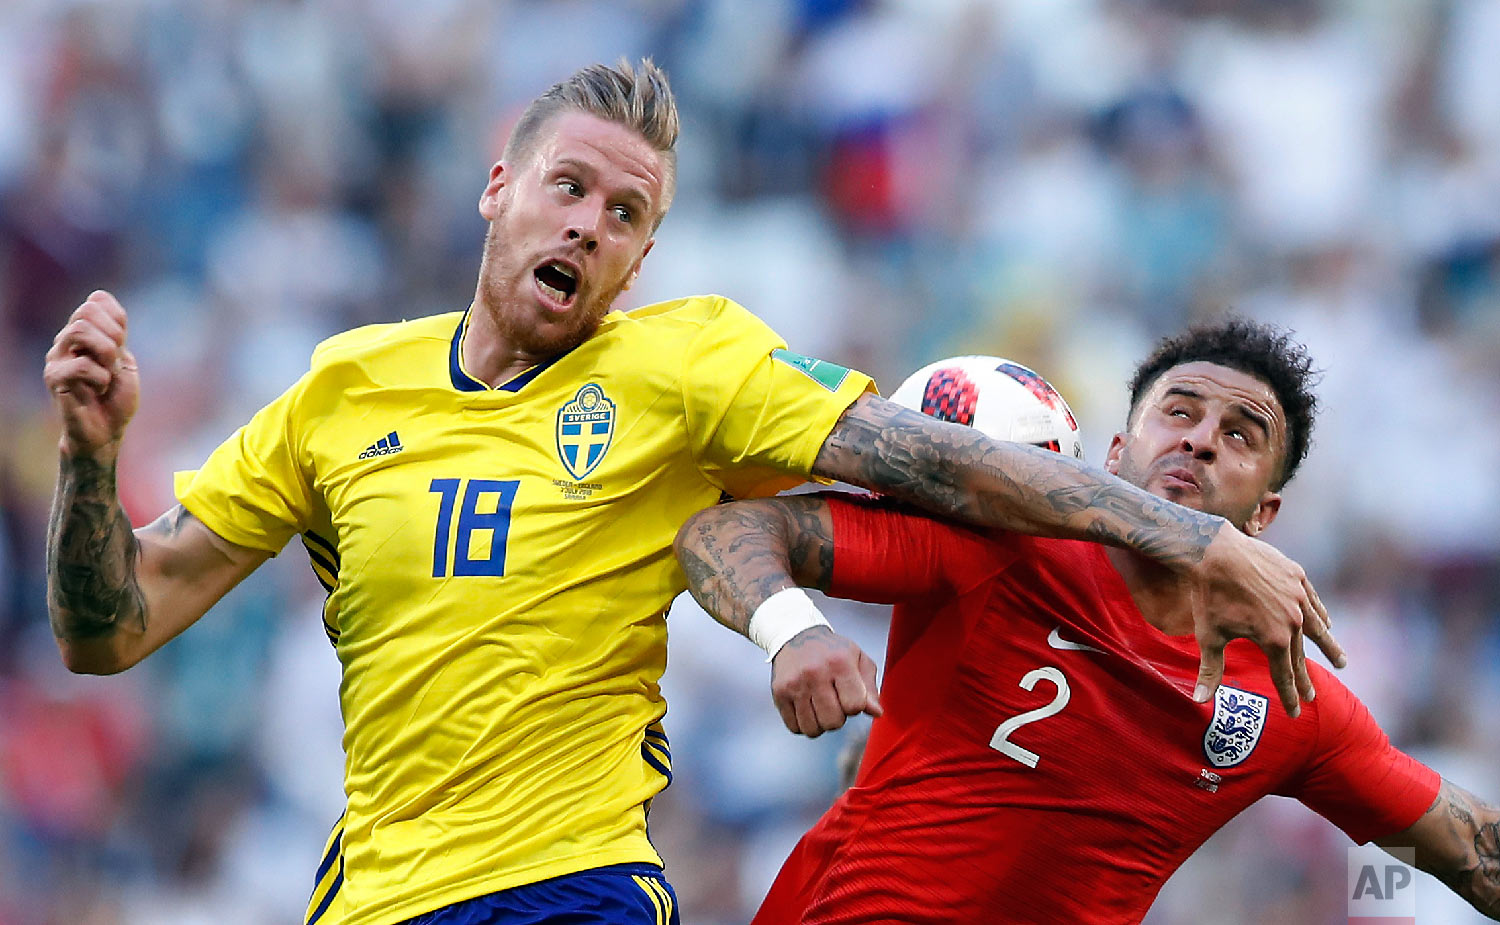  Sweden's Pontus Jansson, left, challenges for the ball with England's Kyle Walker during the quarterfinal match between Sweden and England at the 2018 soccer World Cup in the Samara Arena, in Samara, Russia, Saturday, July 7, 2018. (AP Photo/Alastai